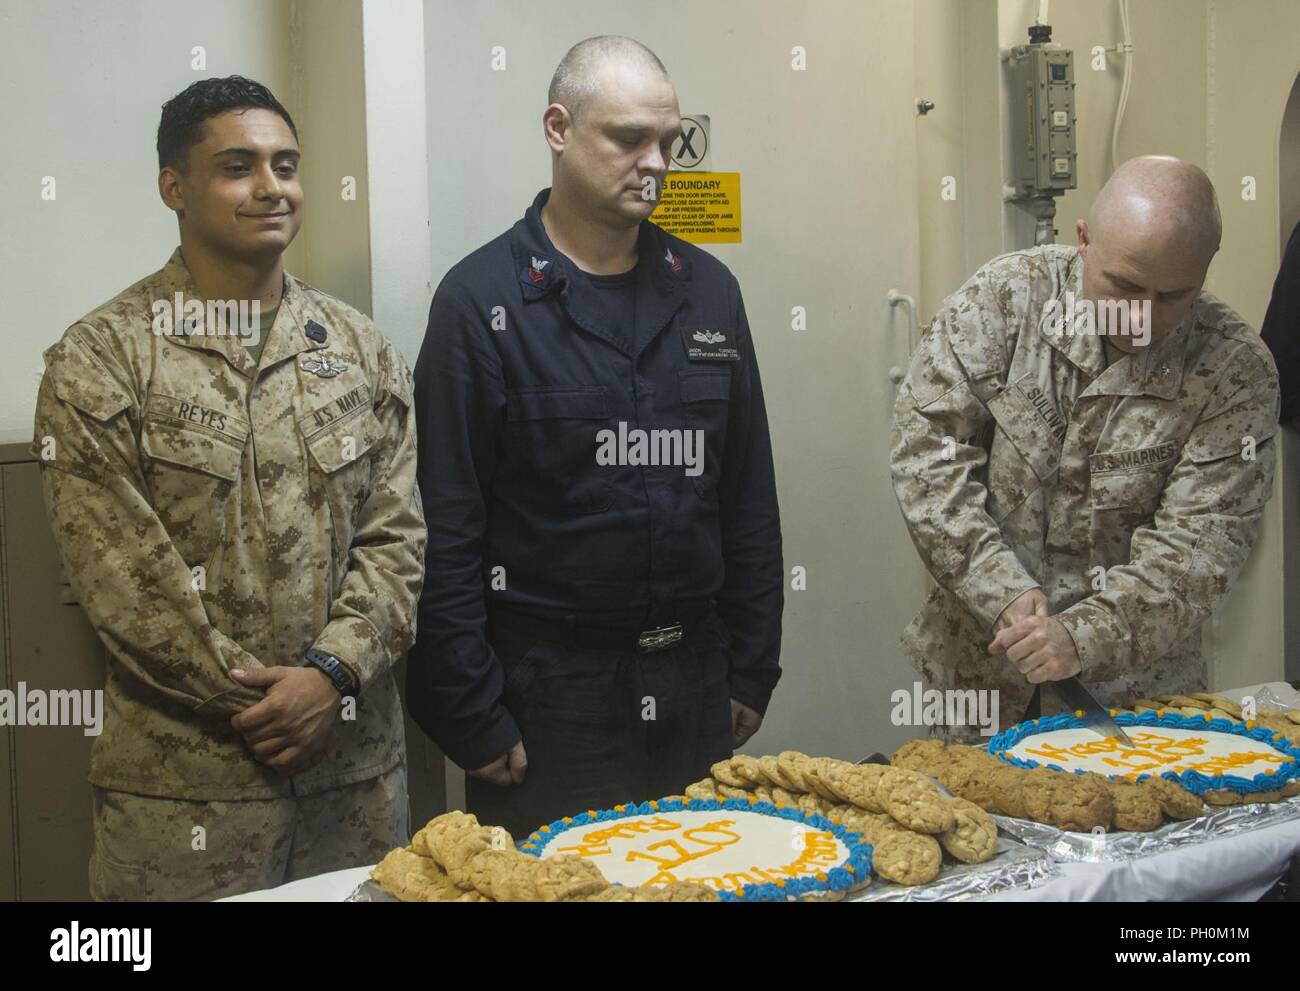 U.S. 5TH FLEET AREA OF OPERATIONS (June 17, 2018) U.S. Marine Corps Col. Farrell J. Sullivan, commanding officer of the 26th Marine Expeditionary Unit (MEU) cuts a cake in celebration of the 120th Hospital Corpsman birthday in medical triage aboard the Wasp-class amphibious assault ship USS Iwo Jima (LHD 7) during the celebration, June 17, 2018. Iwo Jima, homeported in Mayport, Fla., is on deployment to the U.S. 5th Fleet area of operations in support of maritime security operations to reassure allies and partners, and preserve the freedom of navigation and the free flow of commerce in the reg Stock Photo